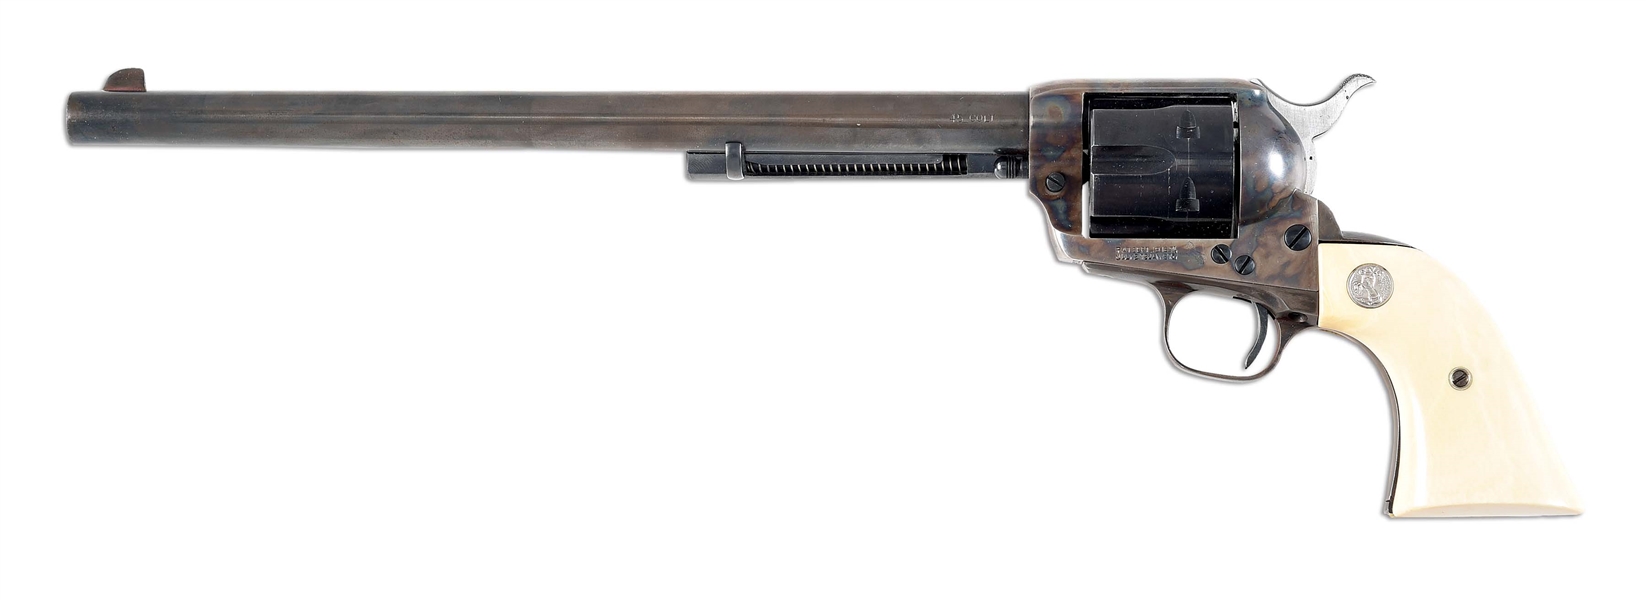 (C) COLT SINGLE ACTION ARMY REVOLVER WITH 12 INCH BARREL (1926).